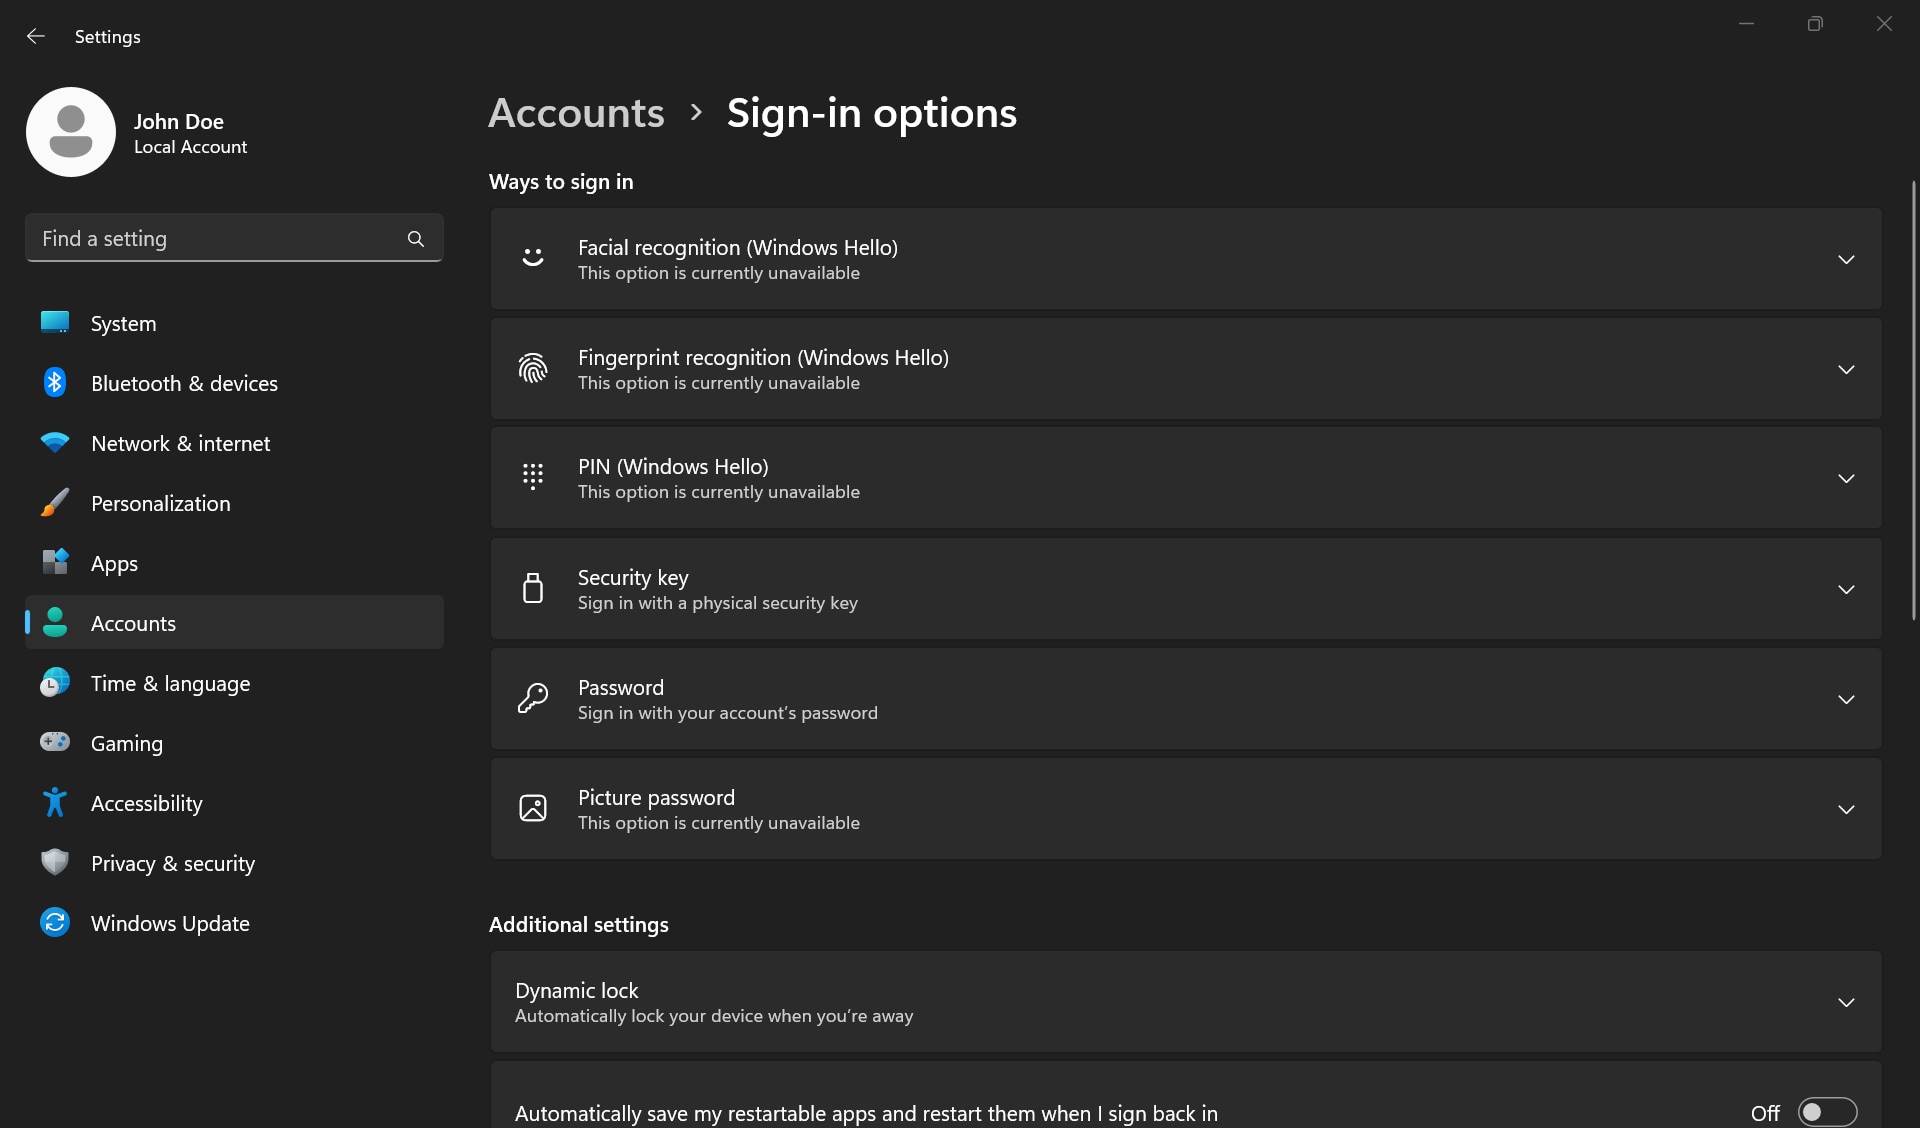 Windows hello, facial recognition, fingerprint recognition, PIN, password settings under the Sign-in options in Windows